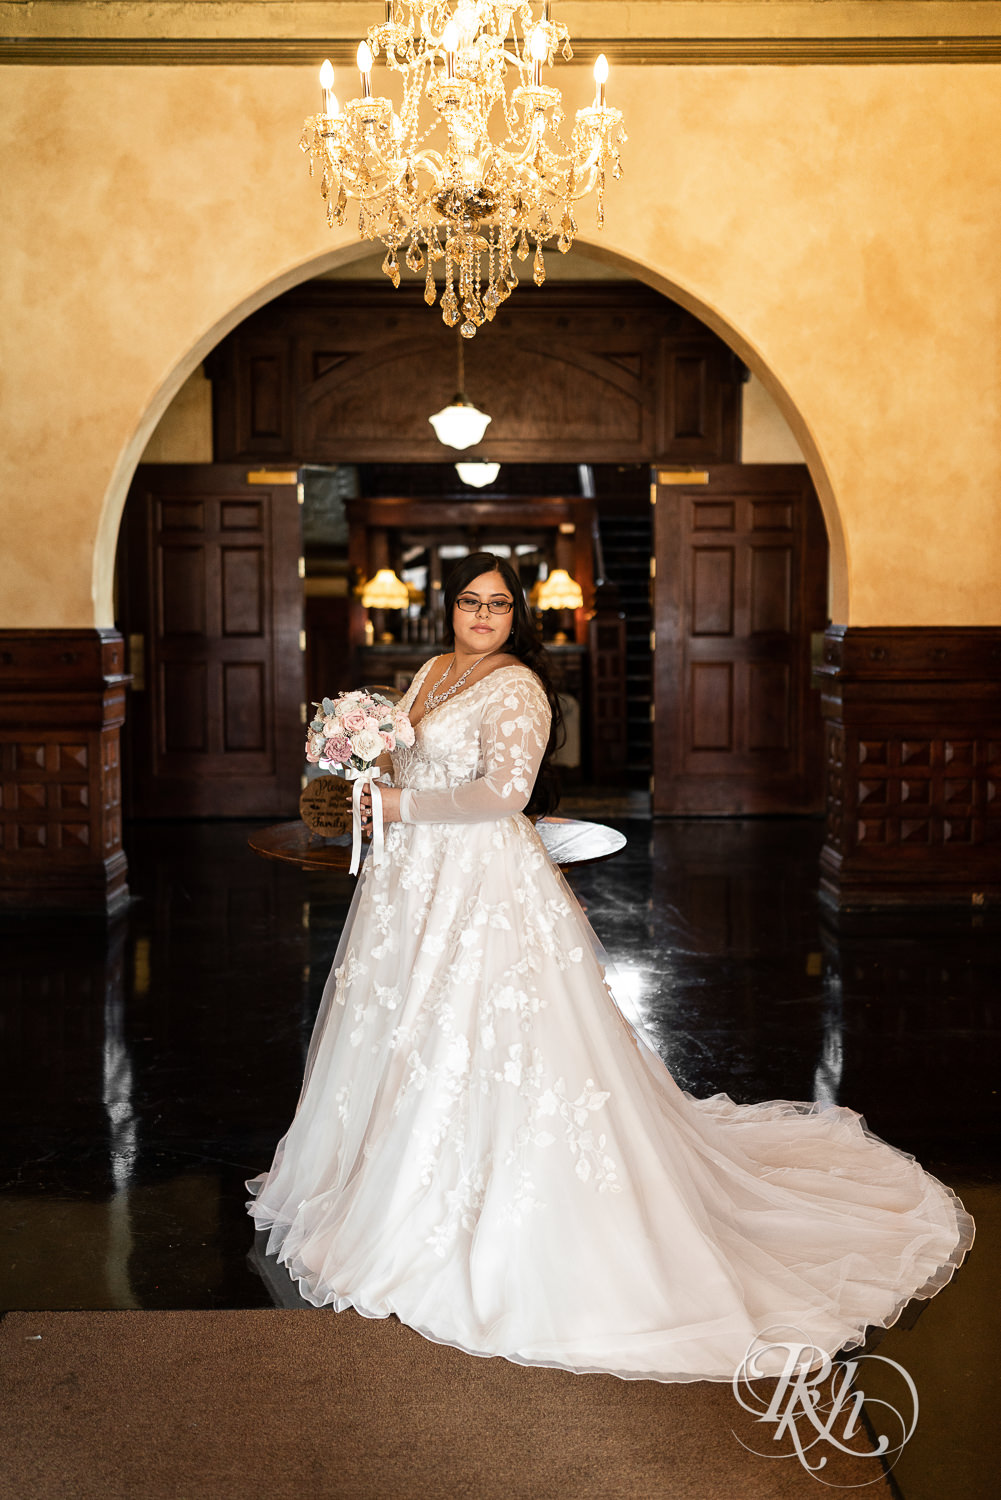 Mexican bride holding flowers under chandelier at the Historic Concord Exchange in Saint Paul, Minnesota.